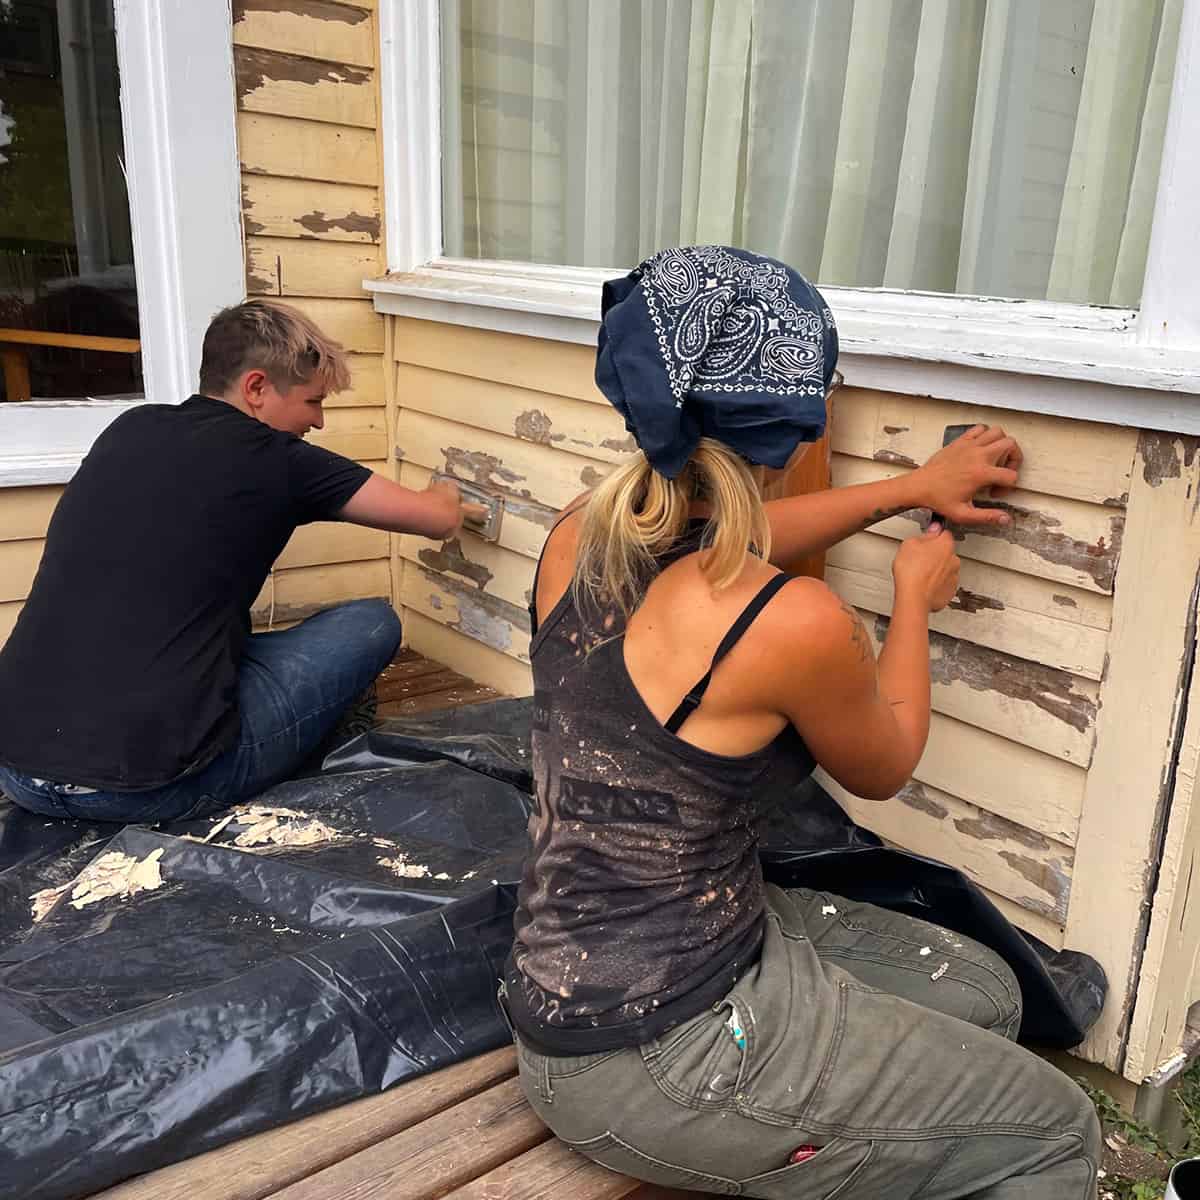 Man and Woman Scraping Paint